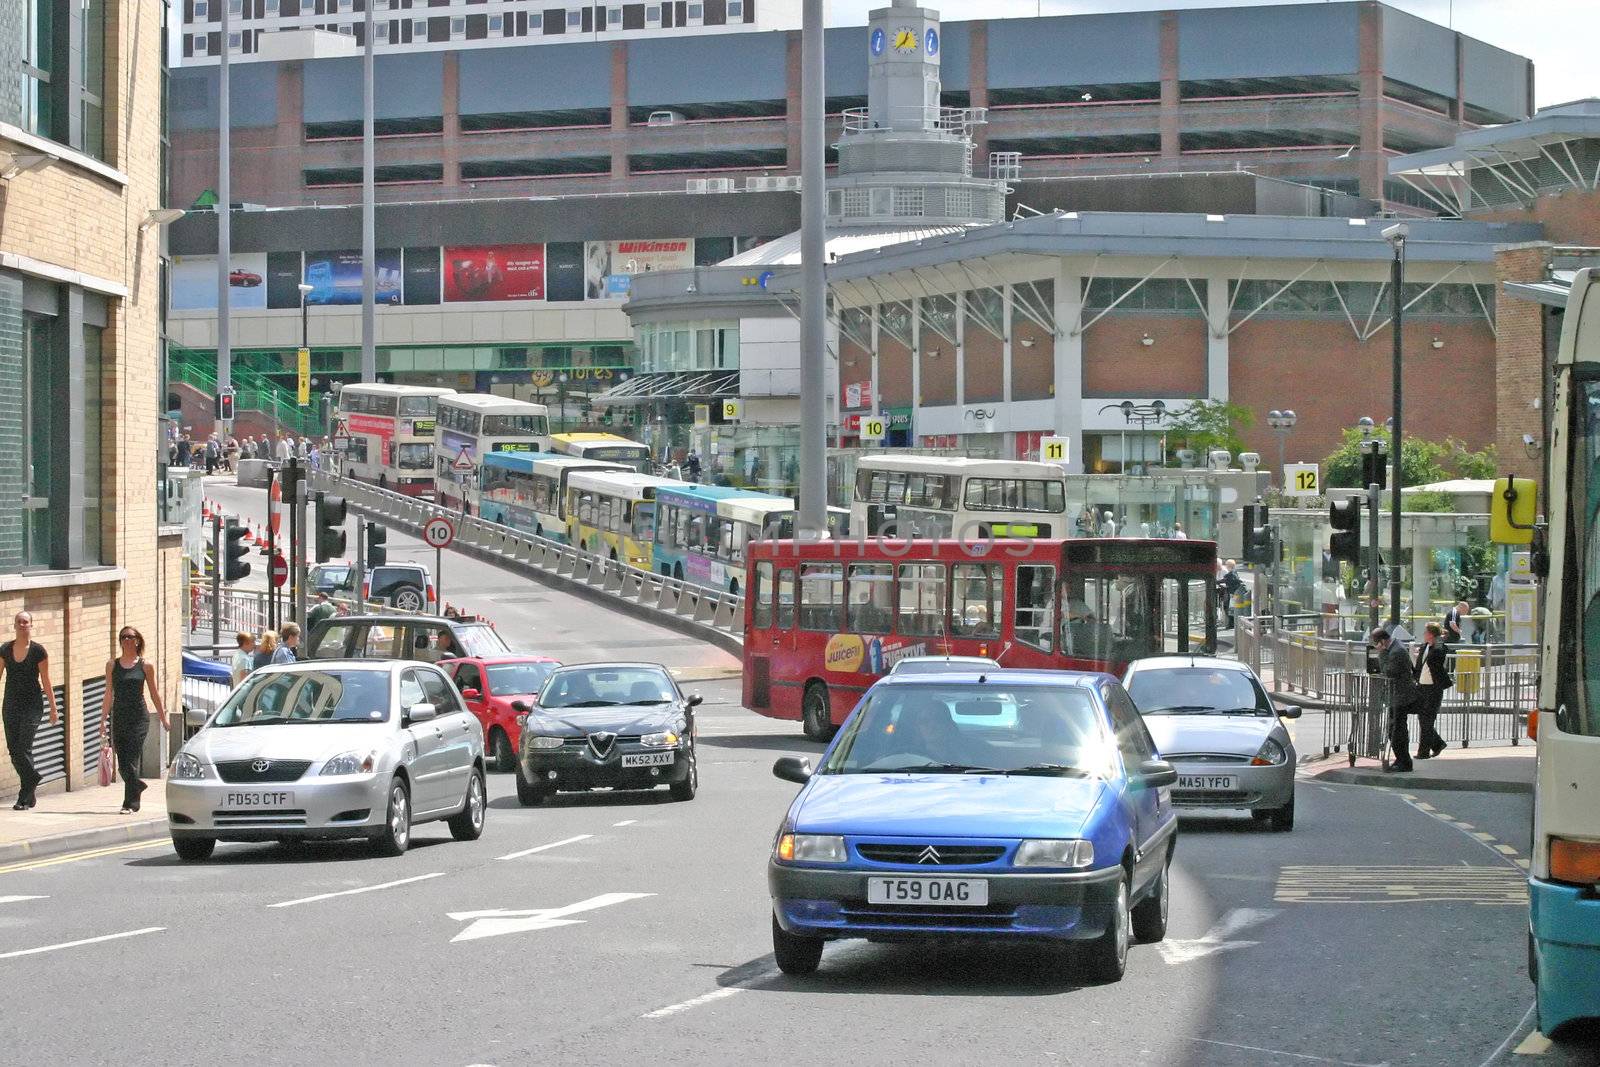 Buses and Cars in Liverpool